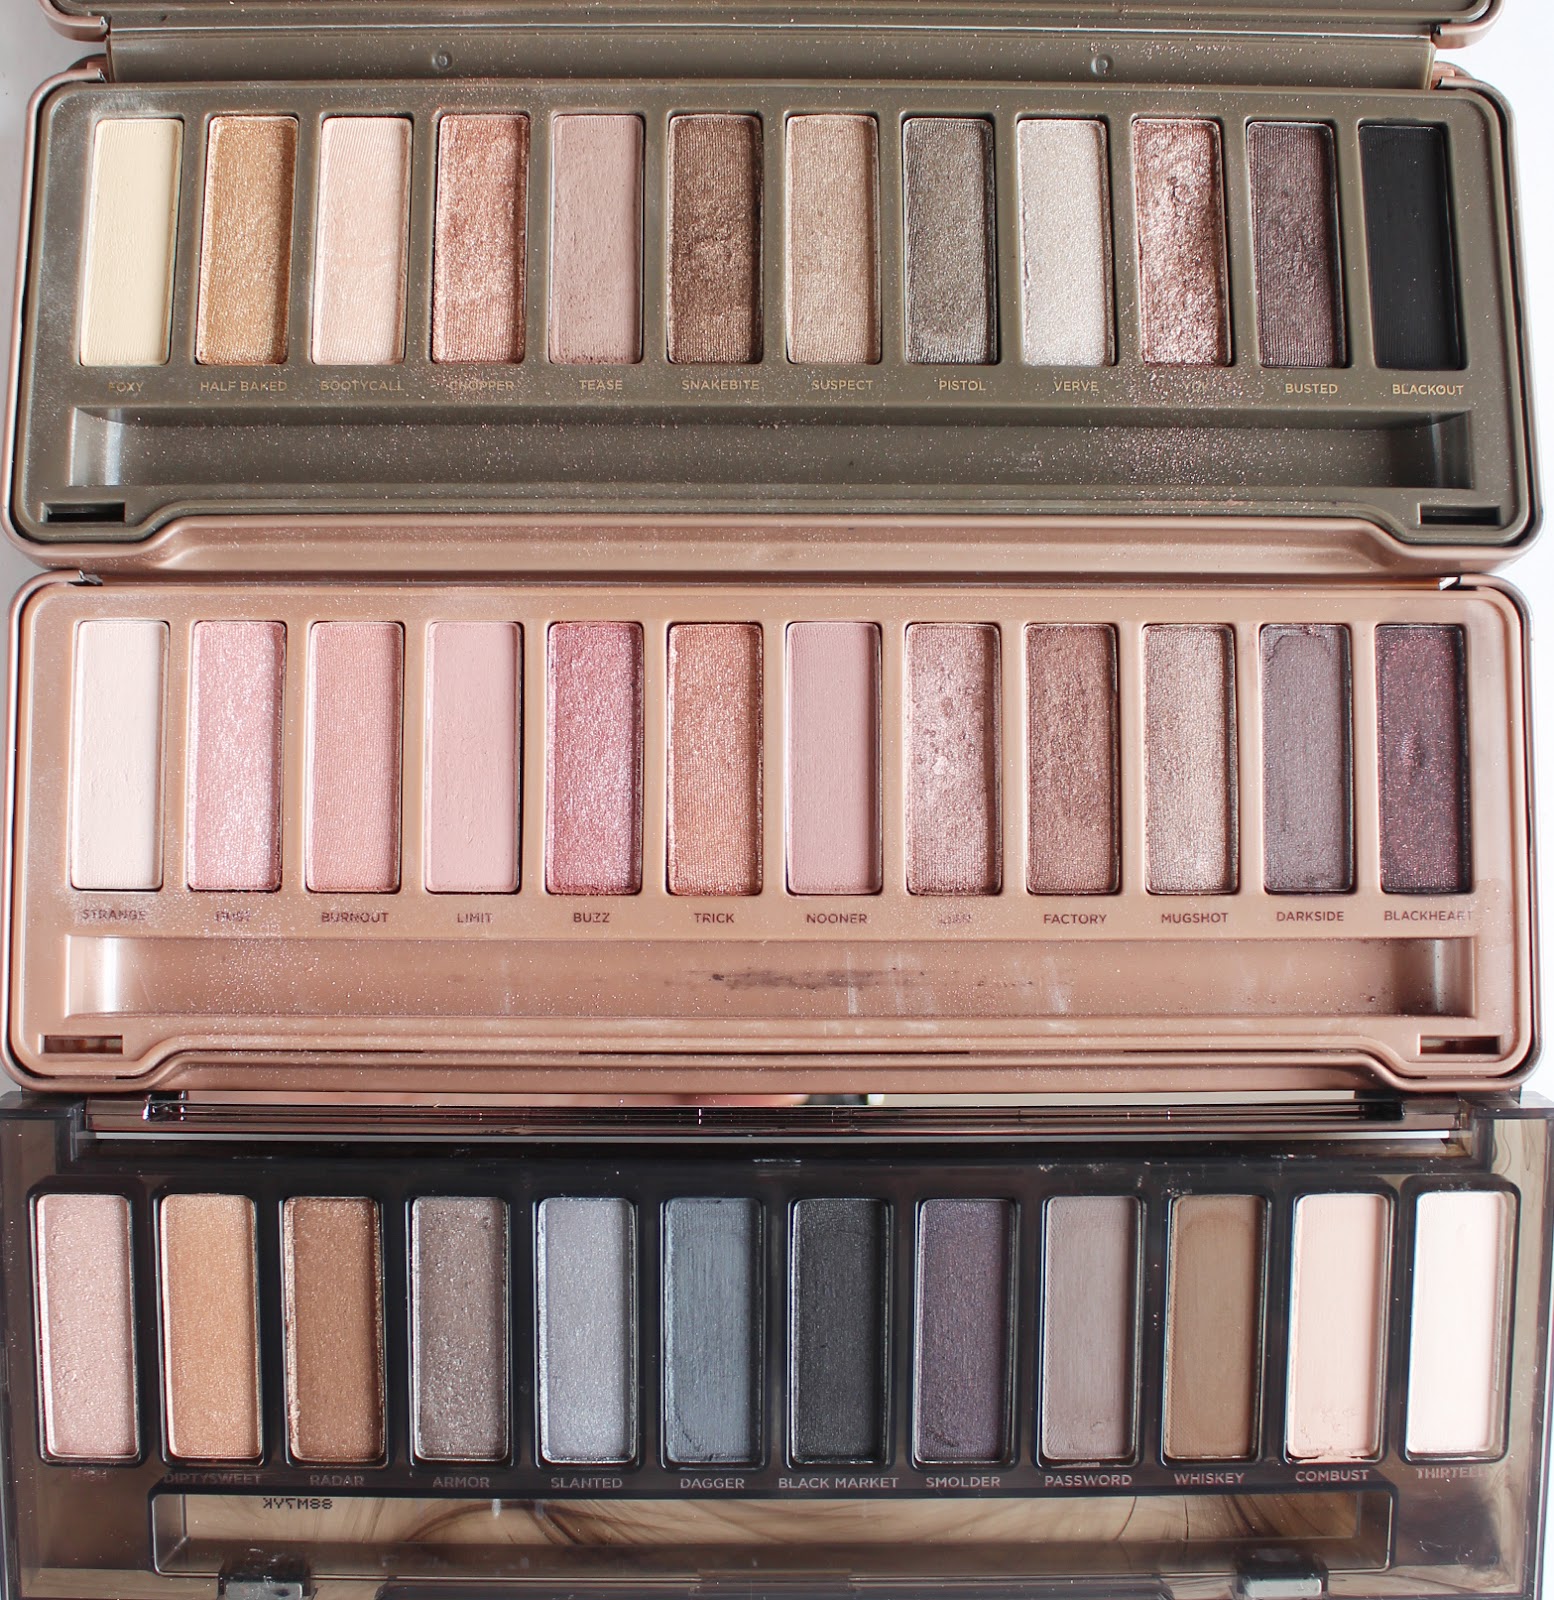 URBAN DECAY | Naked Smoky Palette - Review + Swatches - CassandraMyee